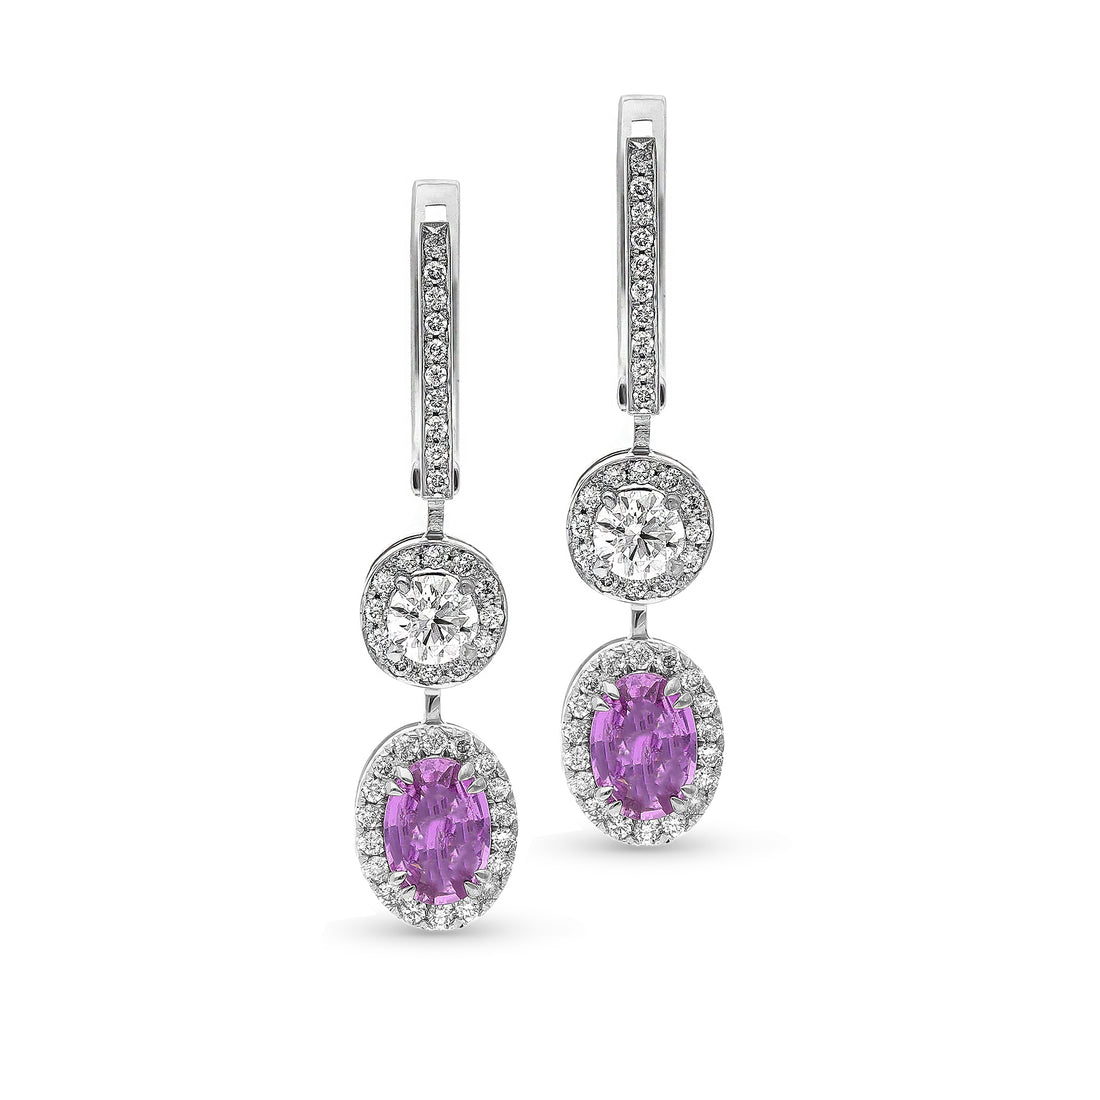 Pink Sapphire and Diamond Double Drop Earrings - 2.8 Carat